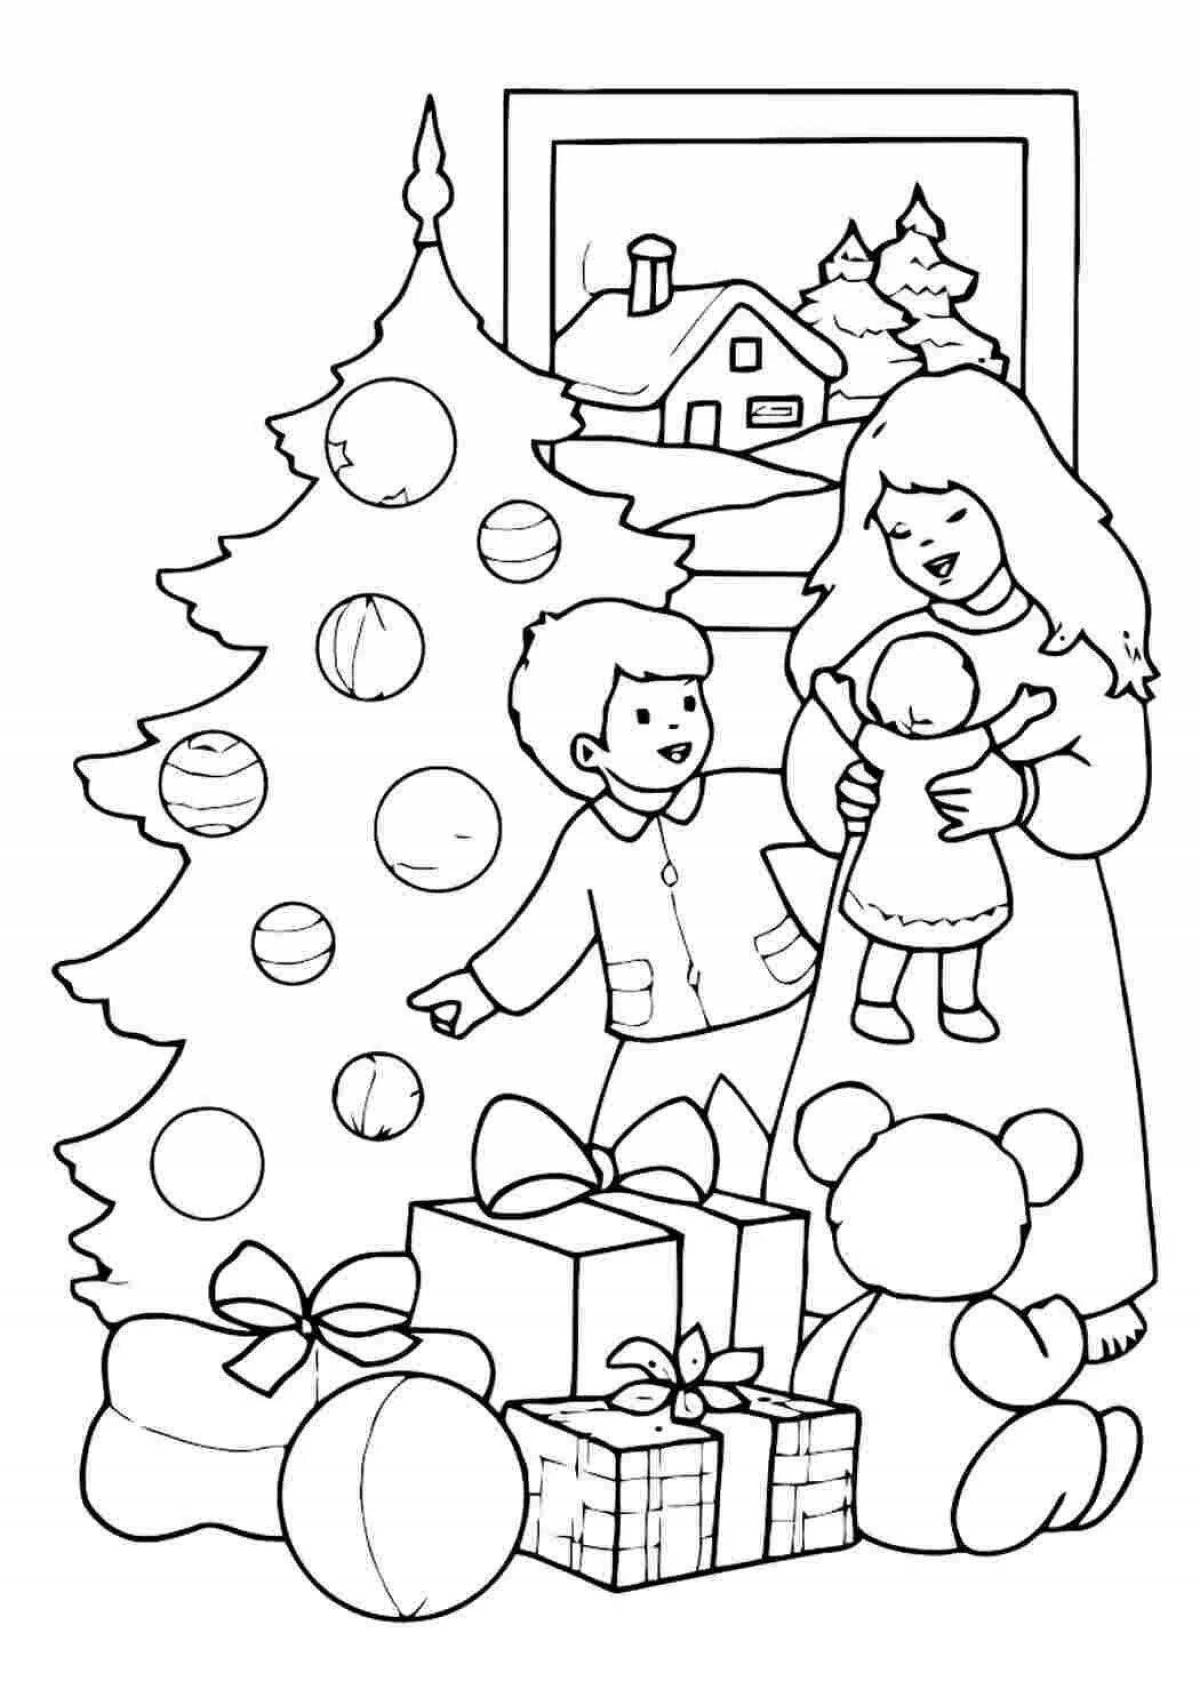 Christmas coloring book for 3-5 year olds